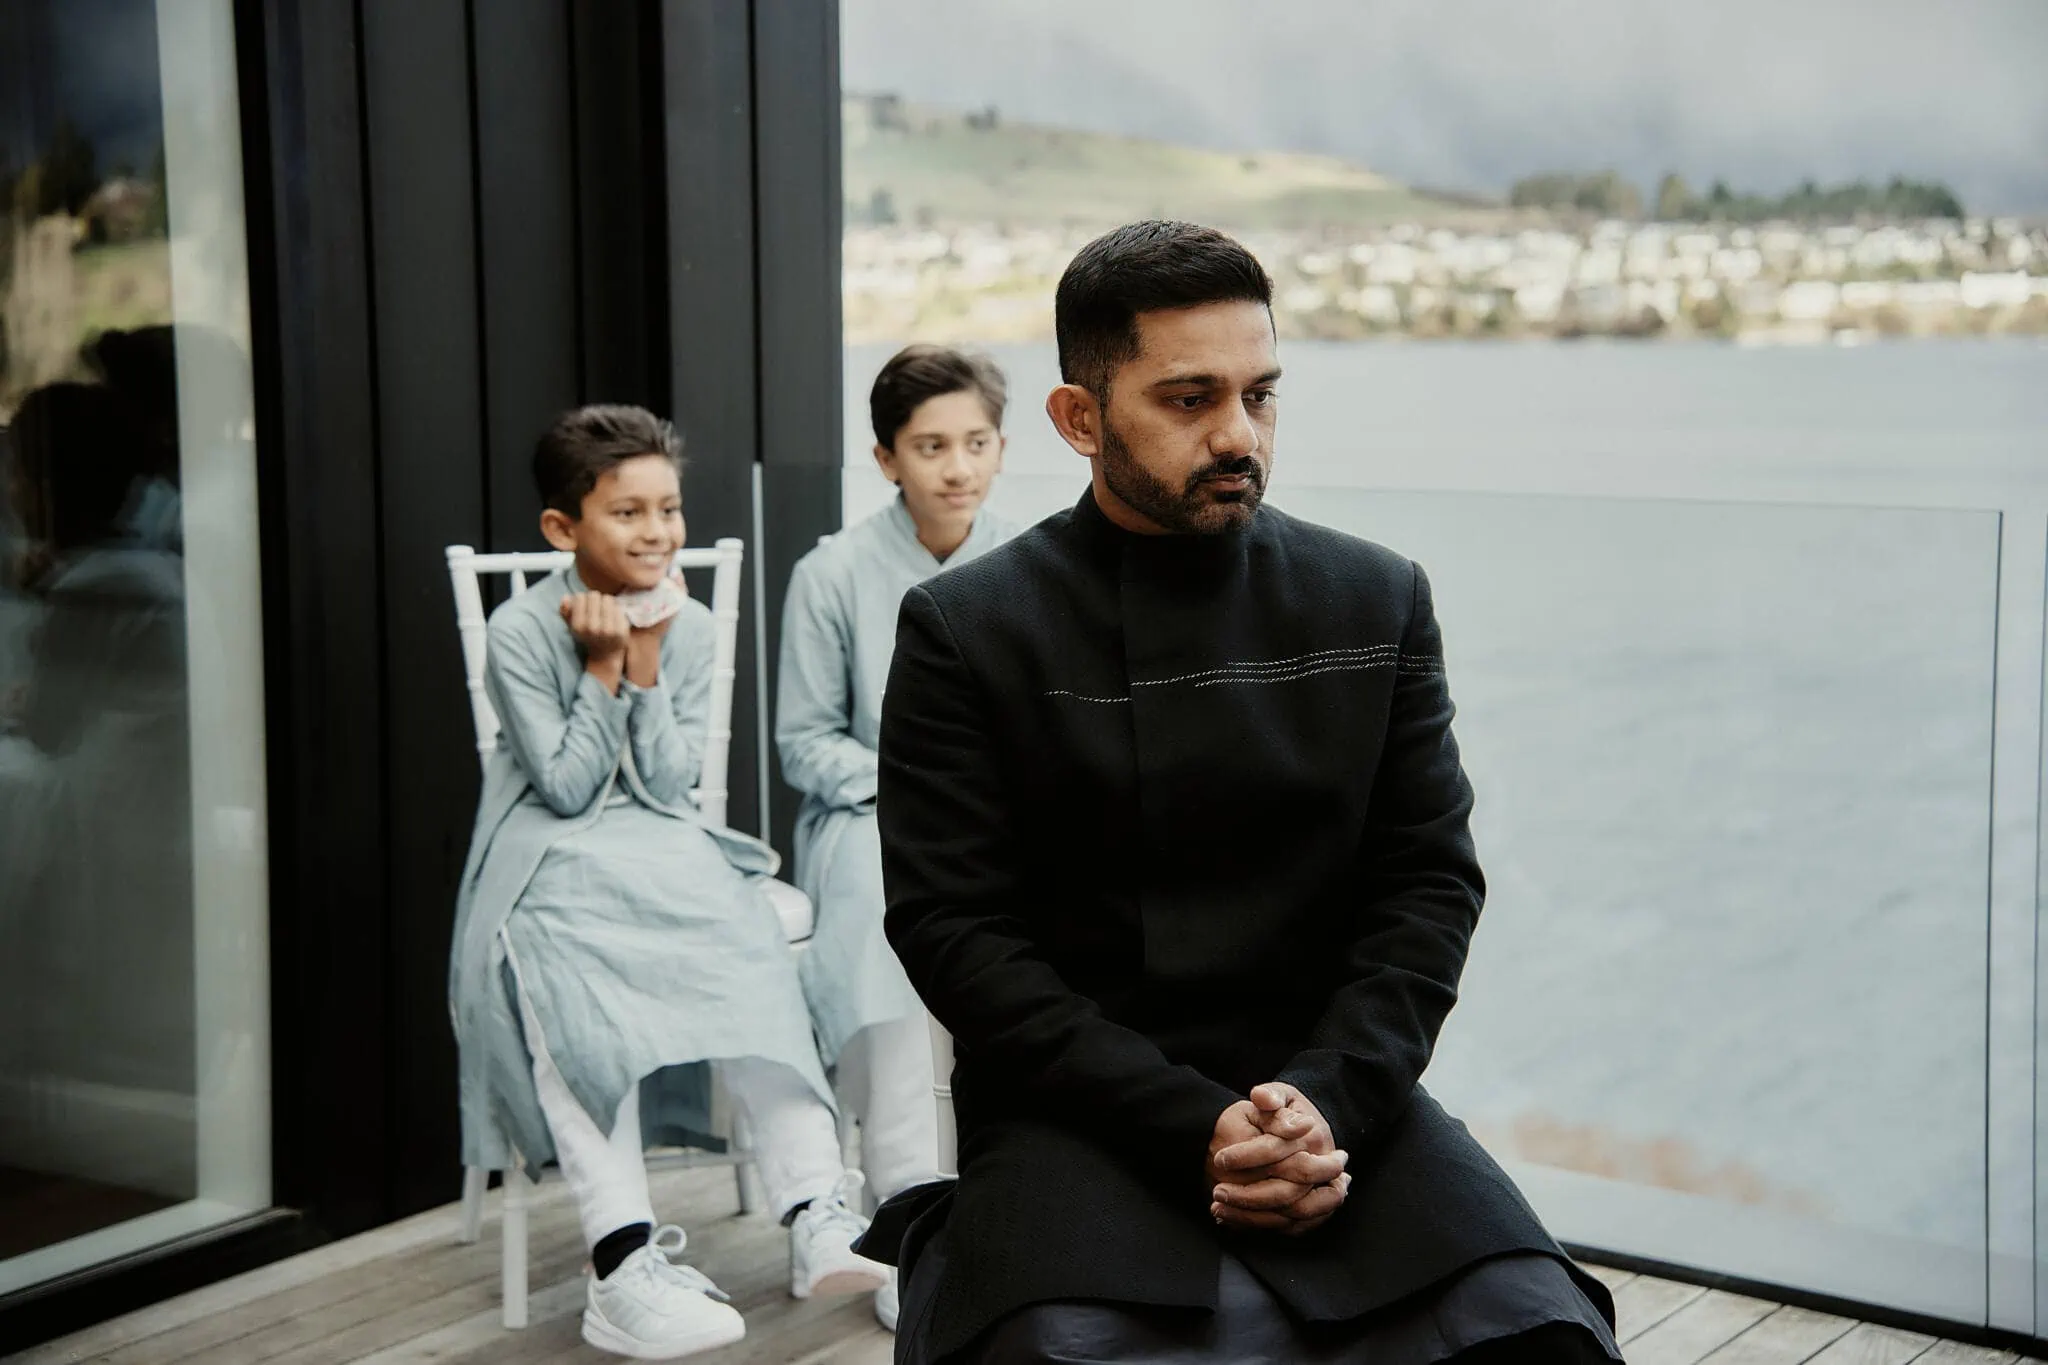 Queenstown New Zealand Elopement Wedding Photographer - During the Queenstown Islamic Wedding, Wasim cherishes a moment on the balcony with his children Yumn.